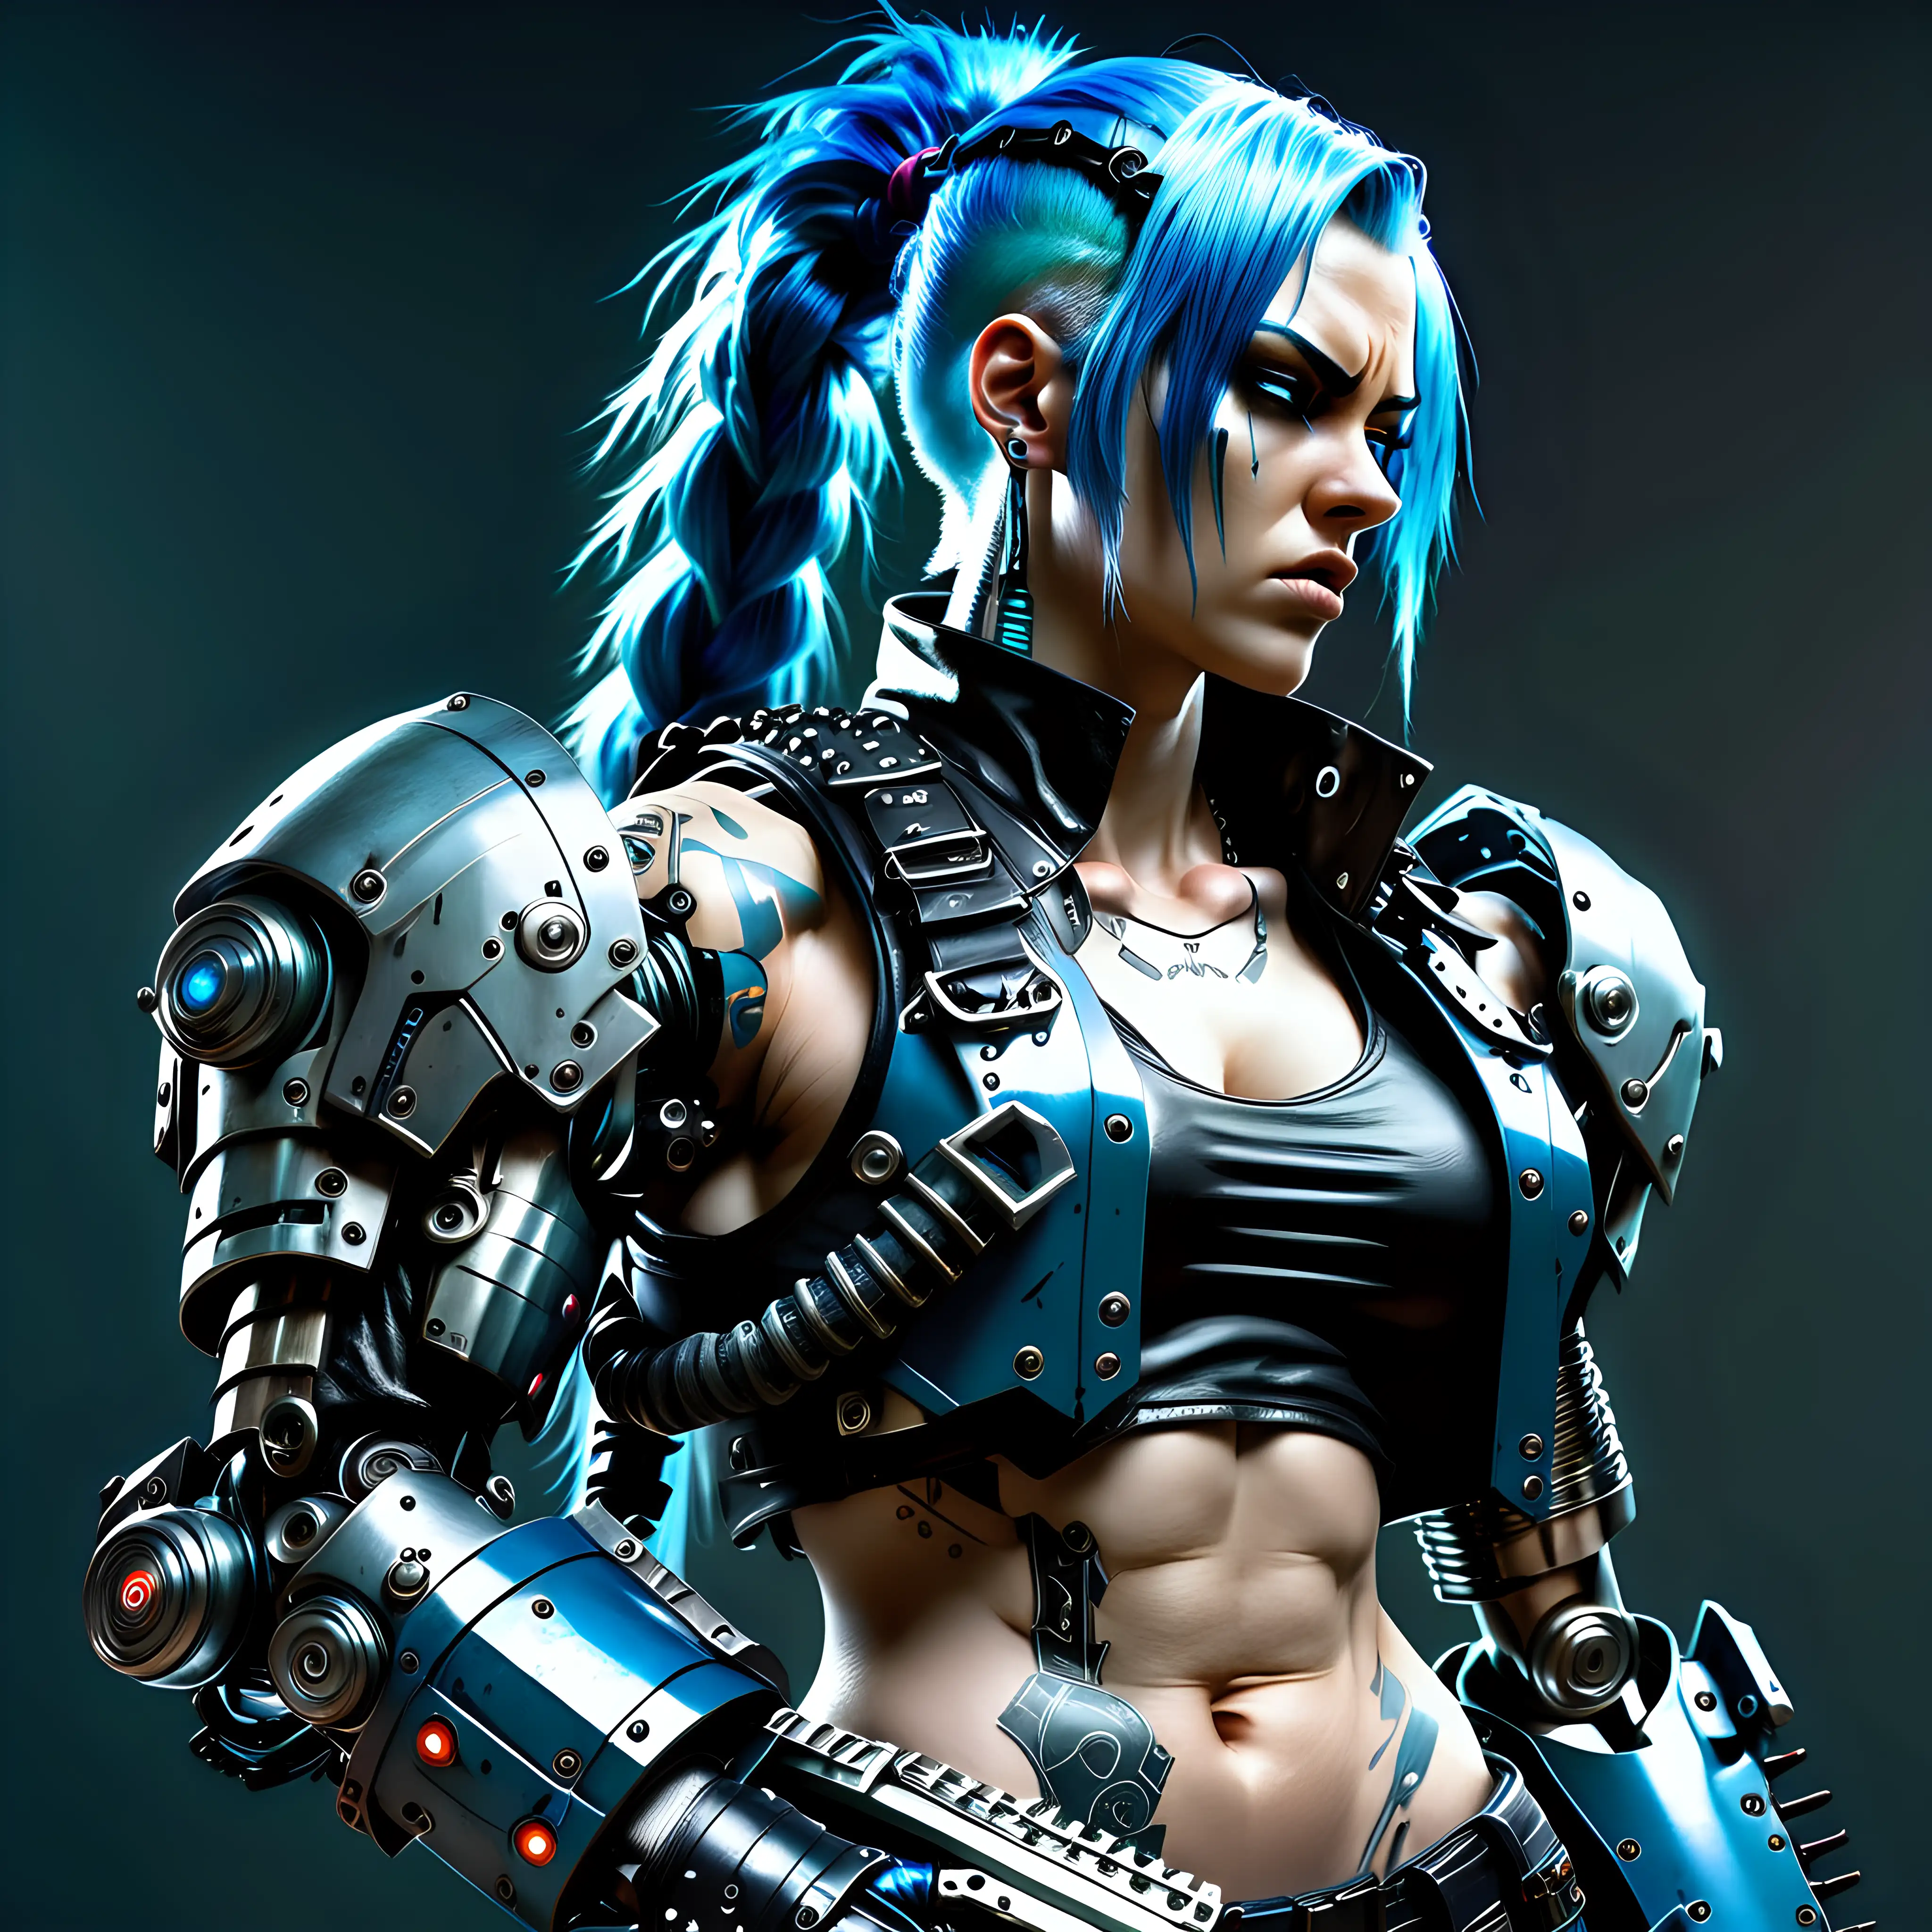 An androgynous, manly very muscular, chubby angry cyberpunk mercenary with one large robotic arm, the body is masculine but the face is feminine, their body is thick, they have blue hair and a long braid, their body is masculine, they are wearing black body armor, he is wearing leather bandolier, his stomach is covered by metal armor